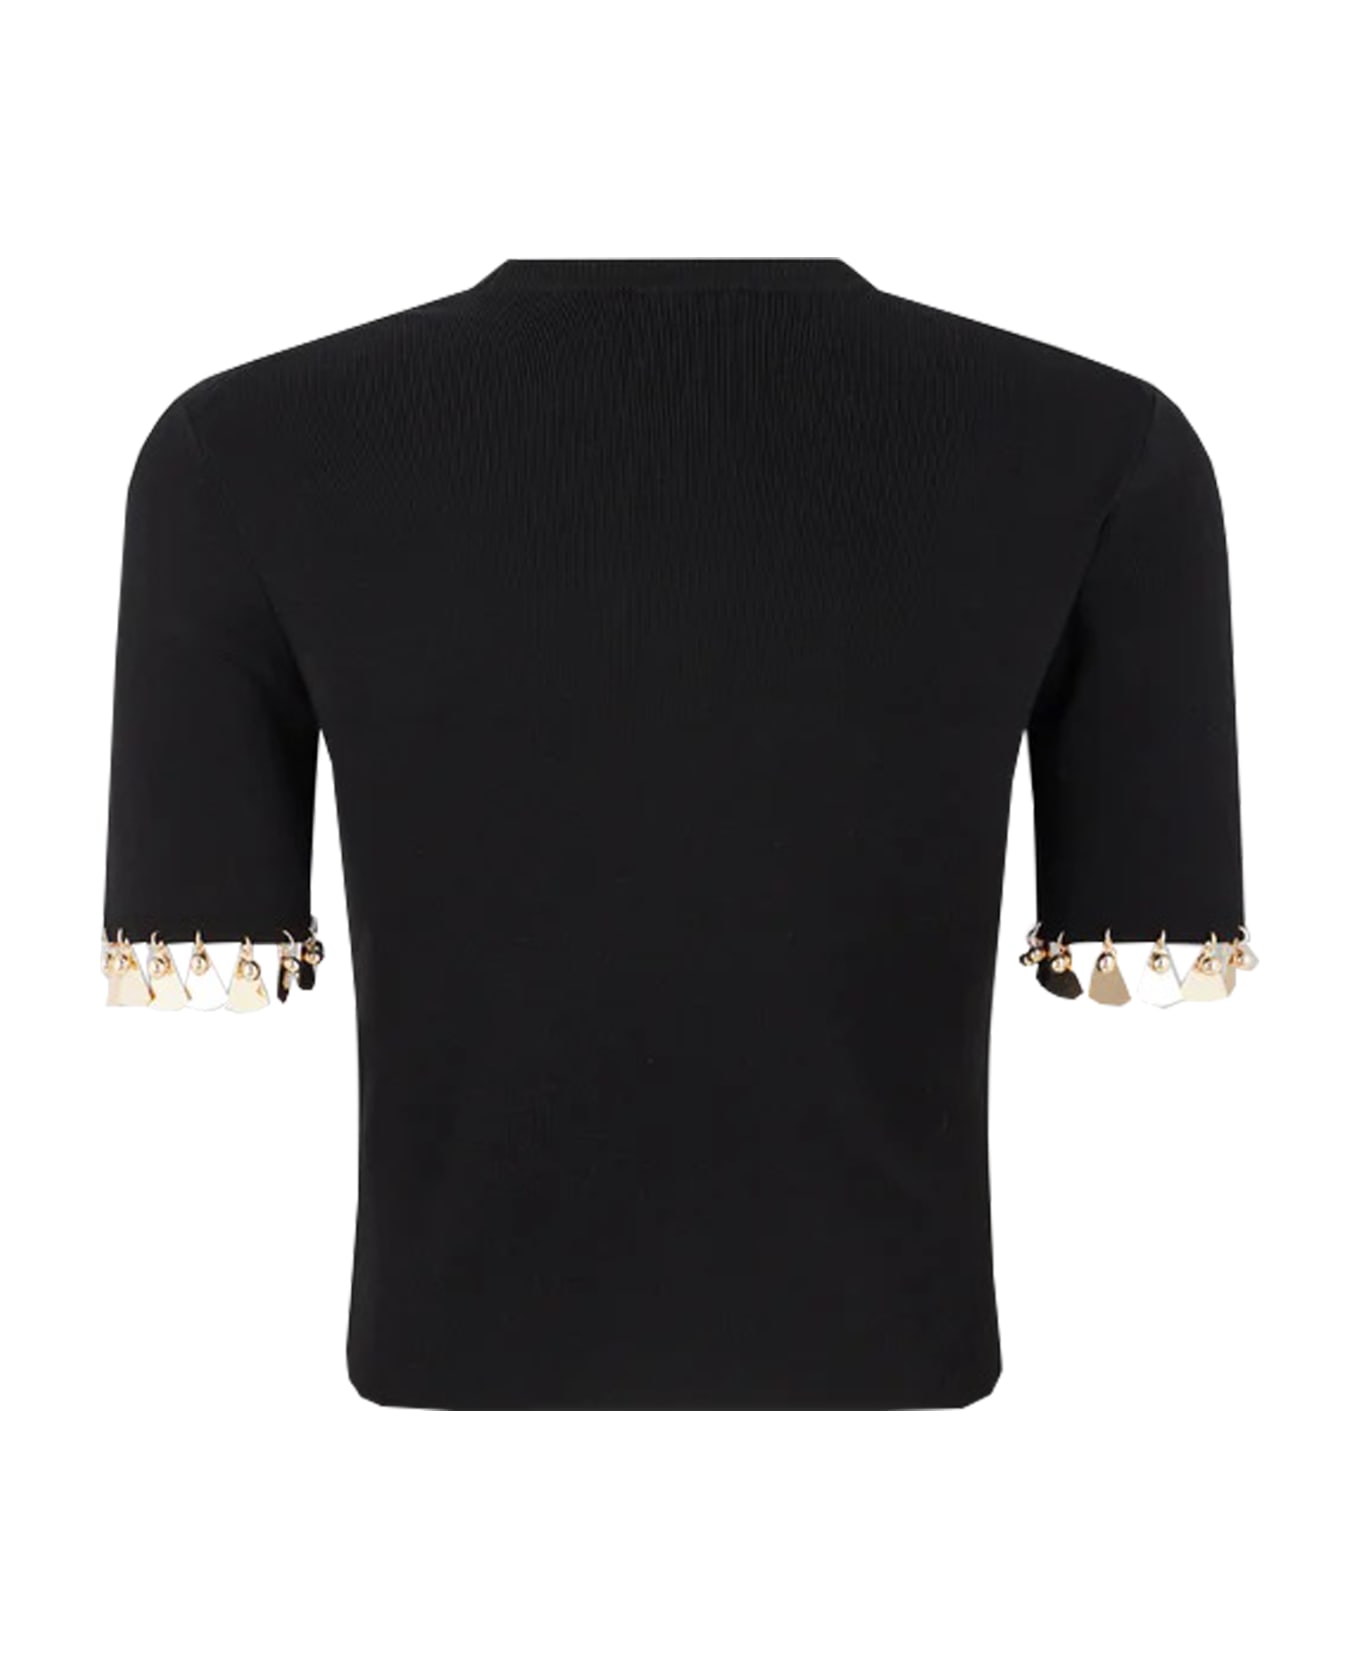 Paco Rabanne Embellished Knit Cropped Top - Black トップス